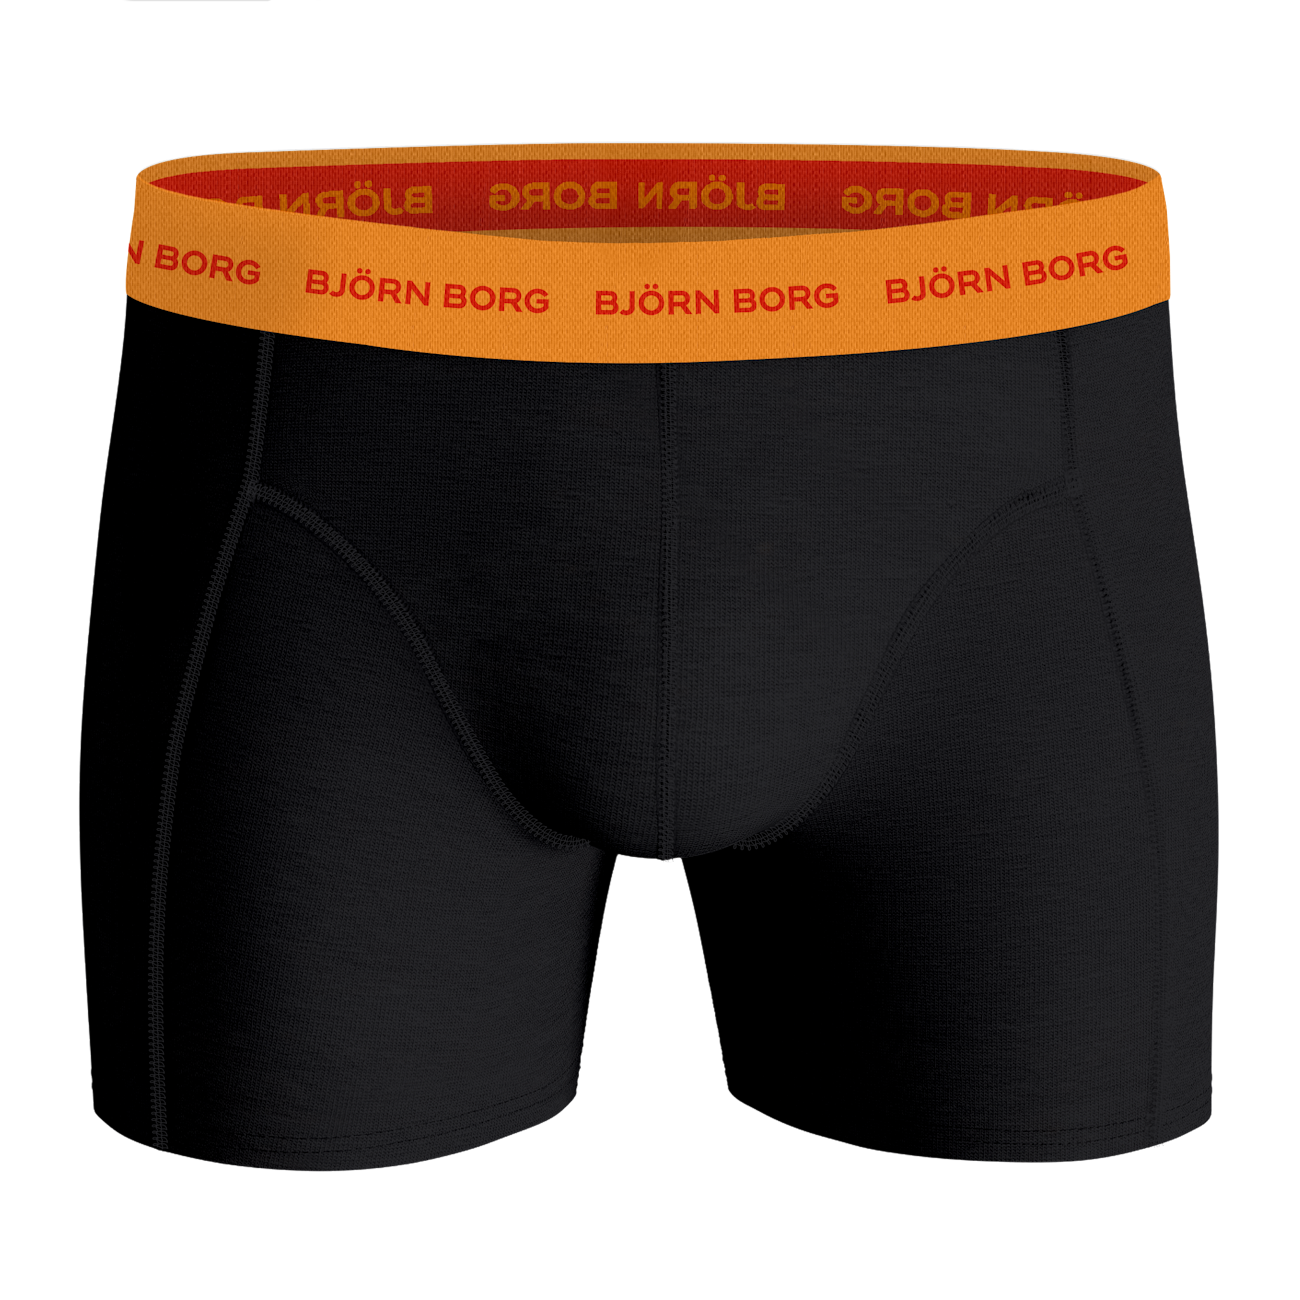 Bjorn Borg Underwear Review: How Good Are Their Boxers? — Pants & Socks